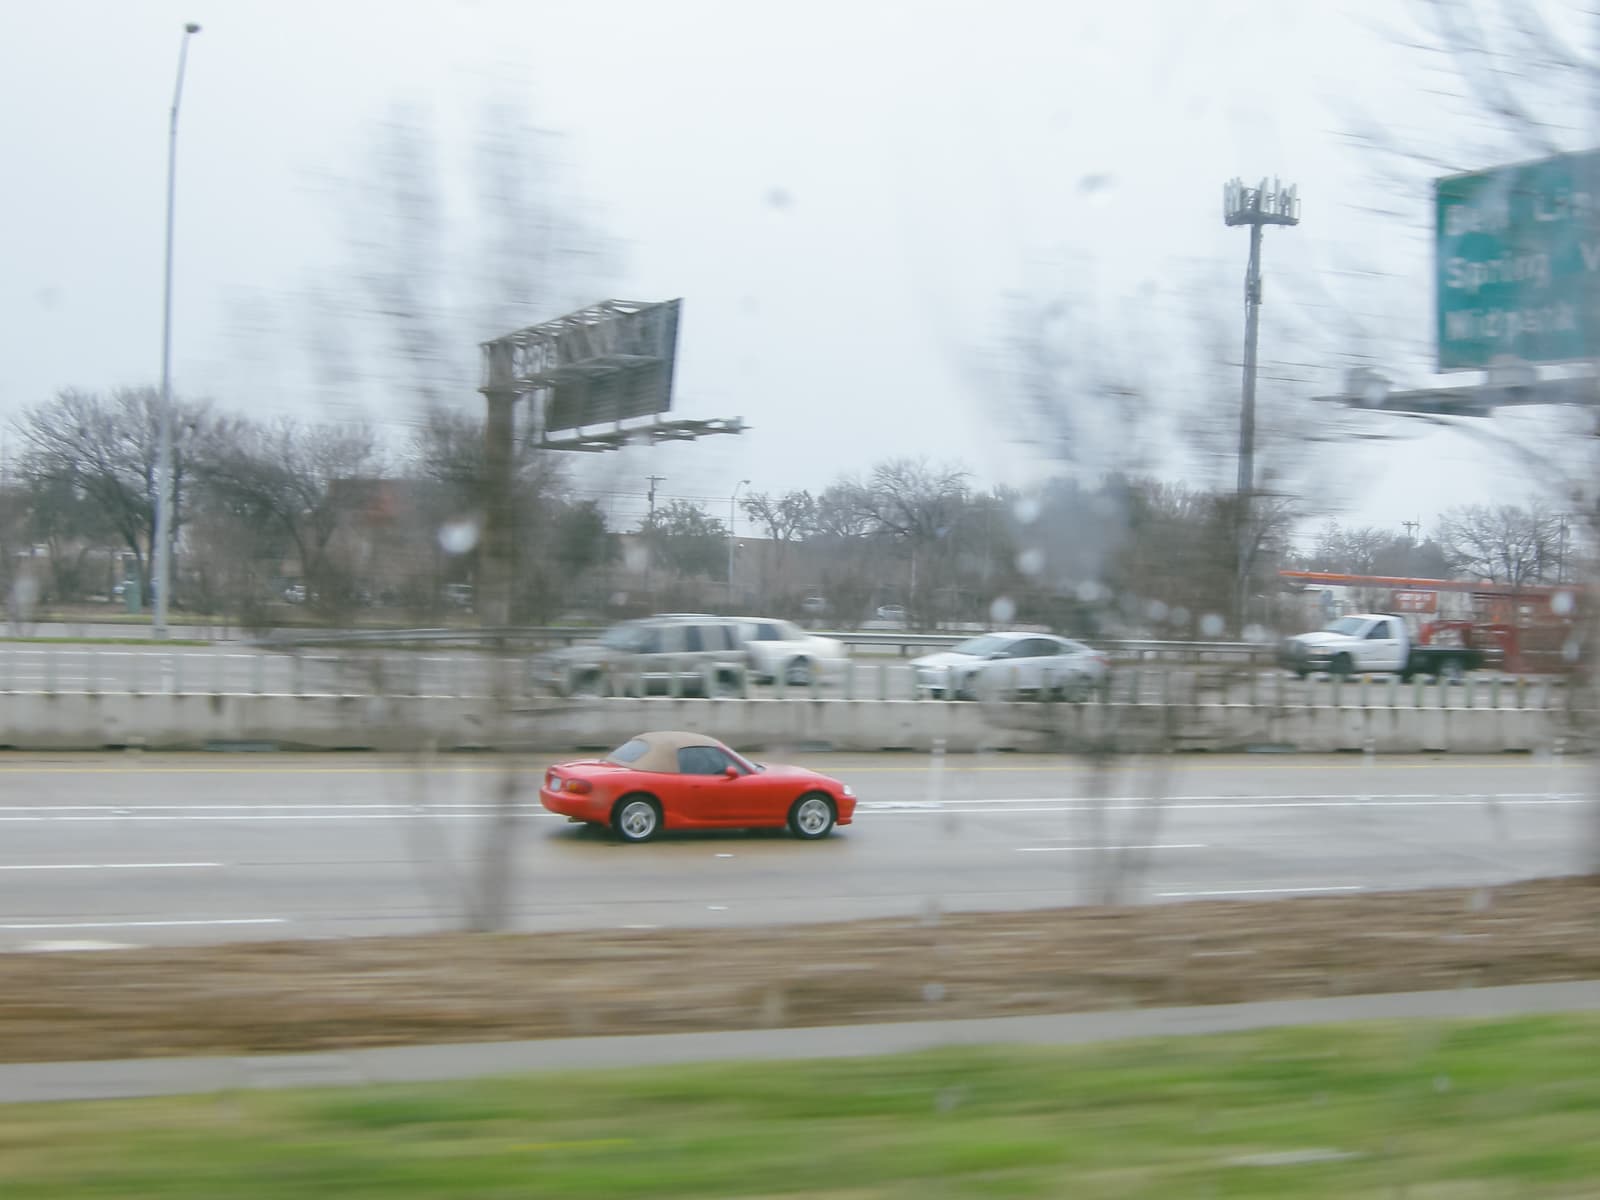 A red car driving on highway 75